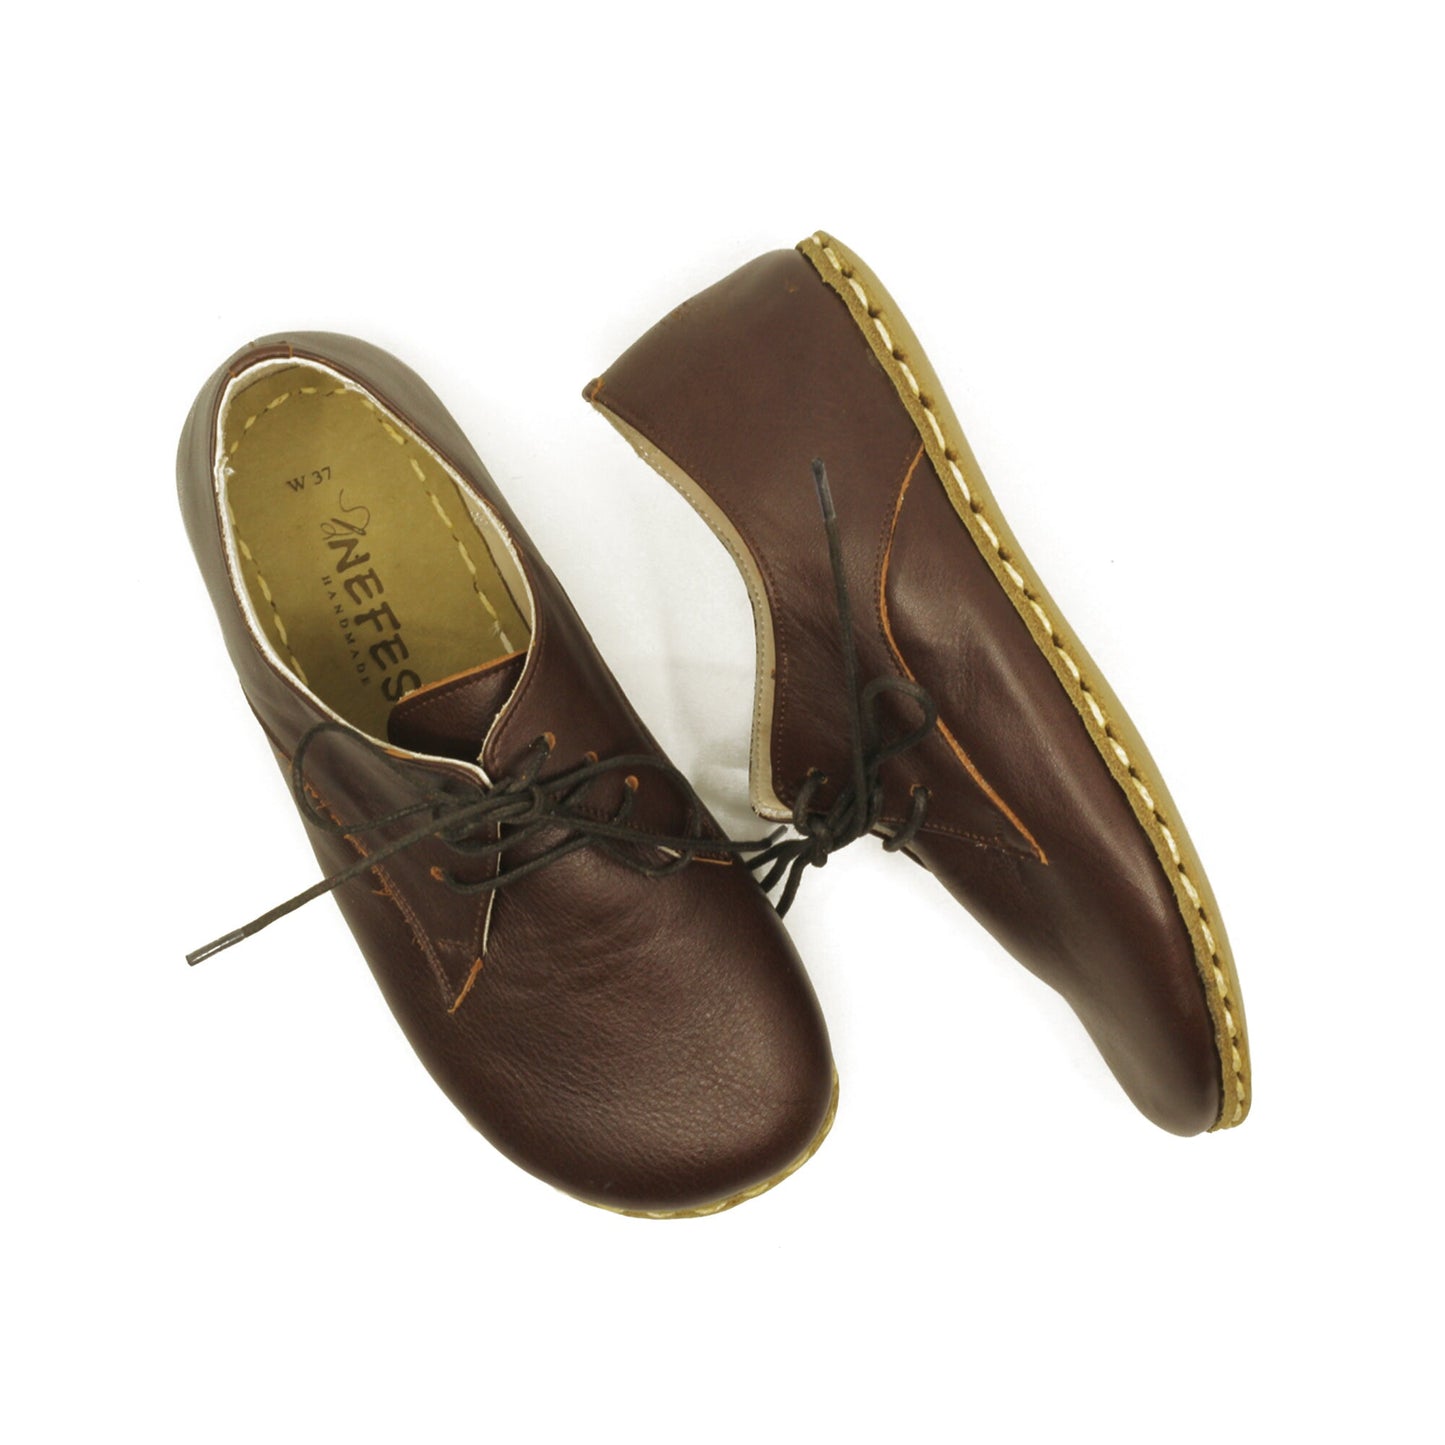 Dark Brown Barefoot Women's Shoes with Natural Buffalo Leather Sole | Shop Now